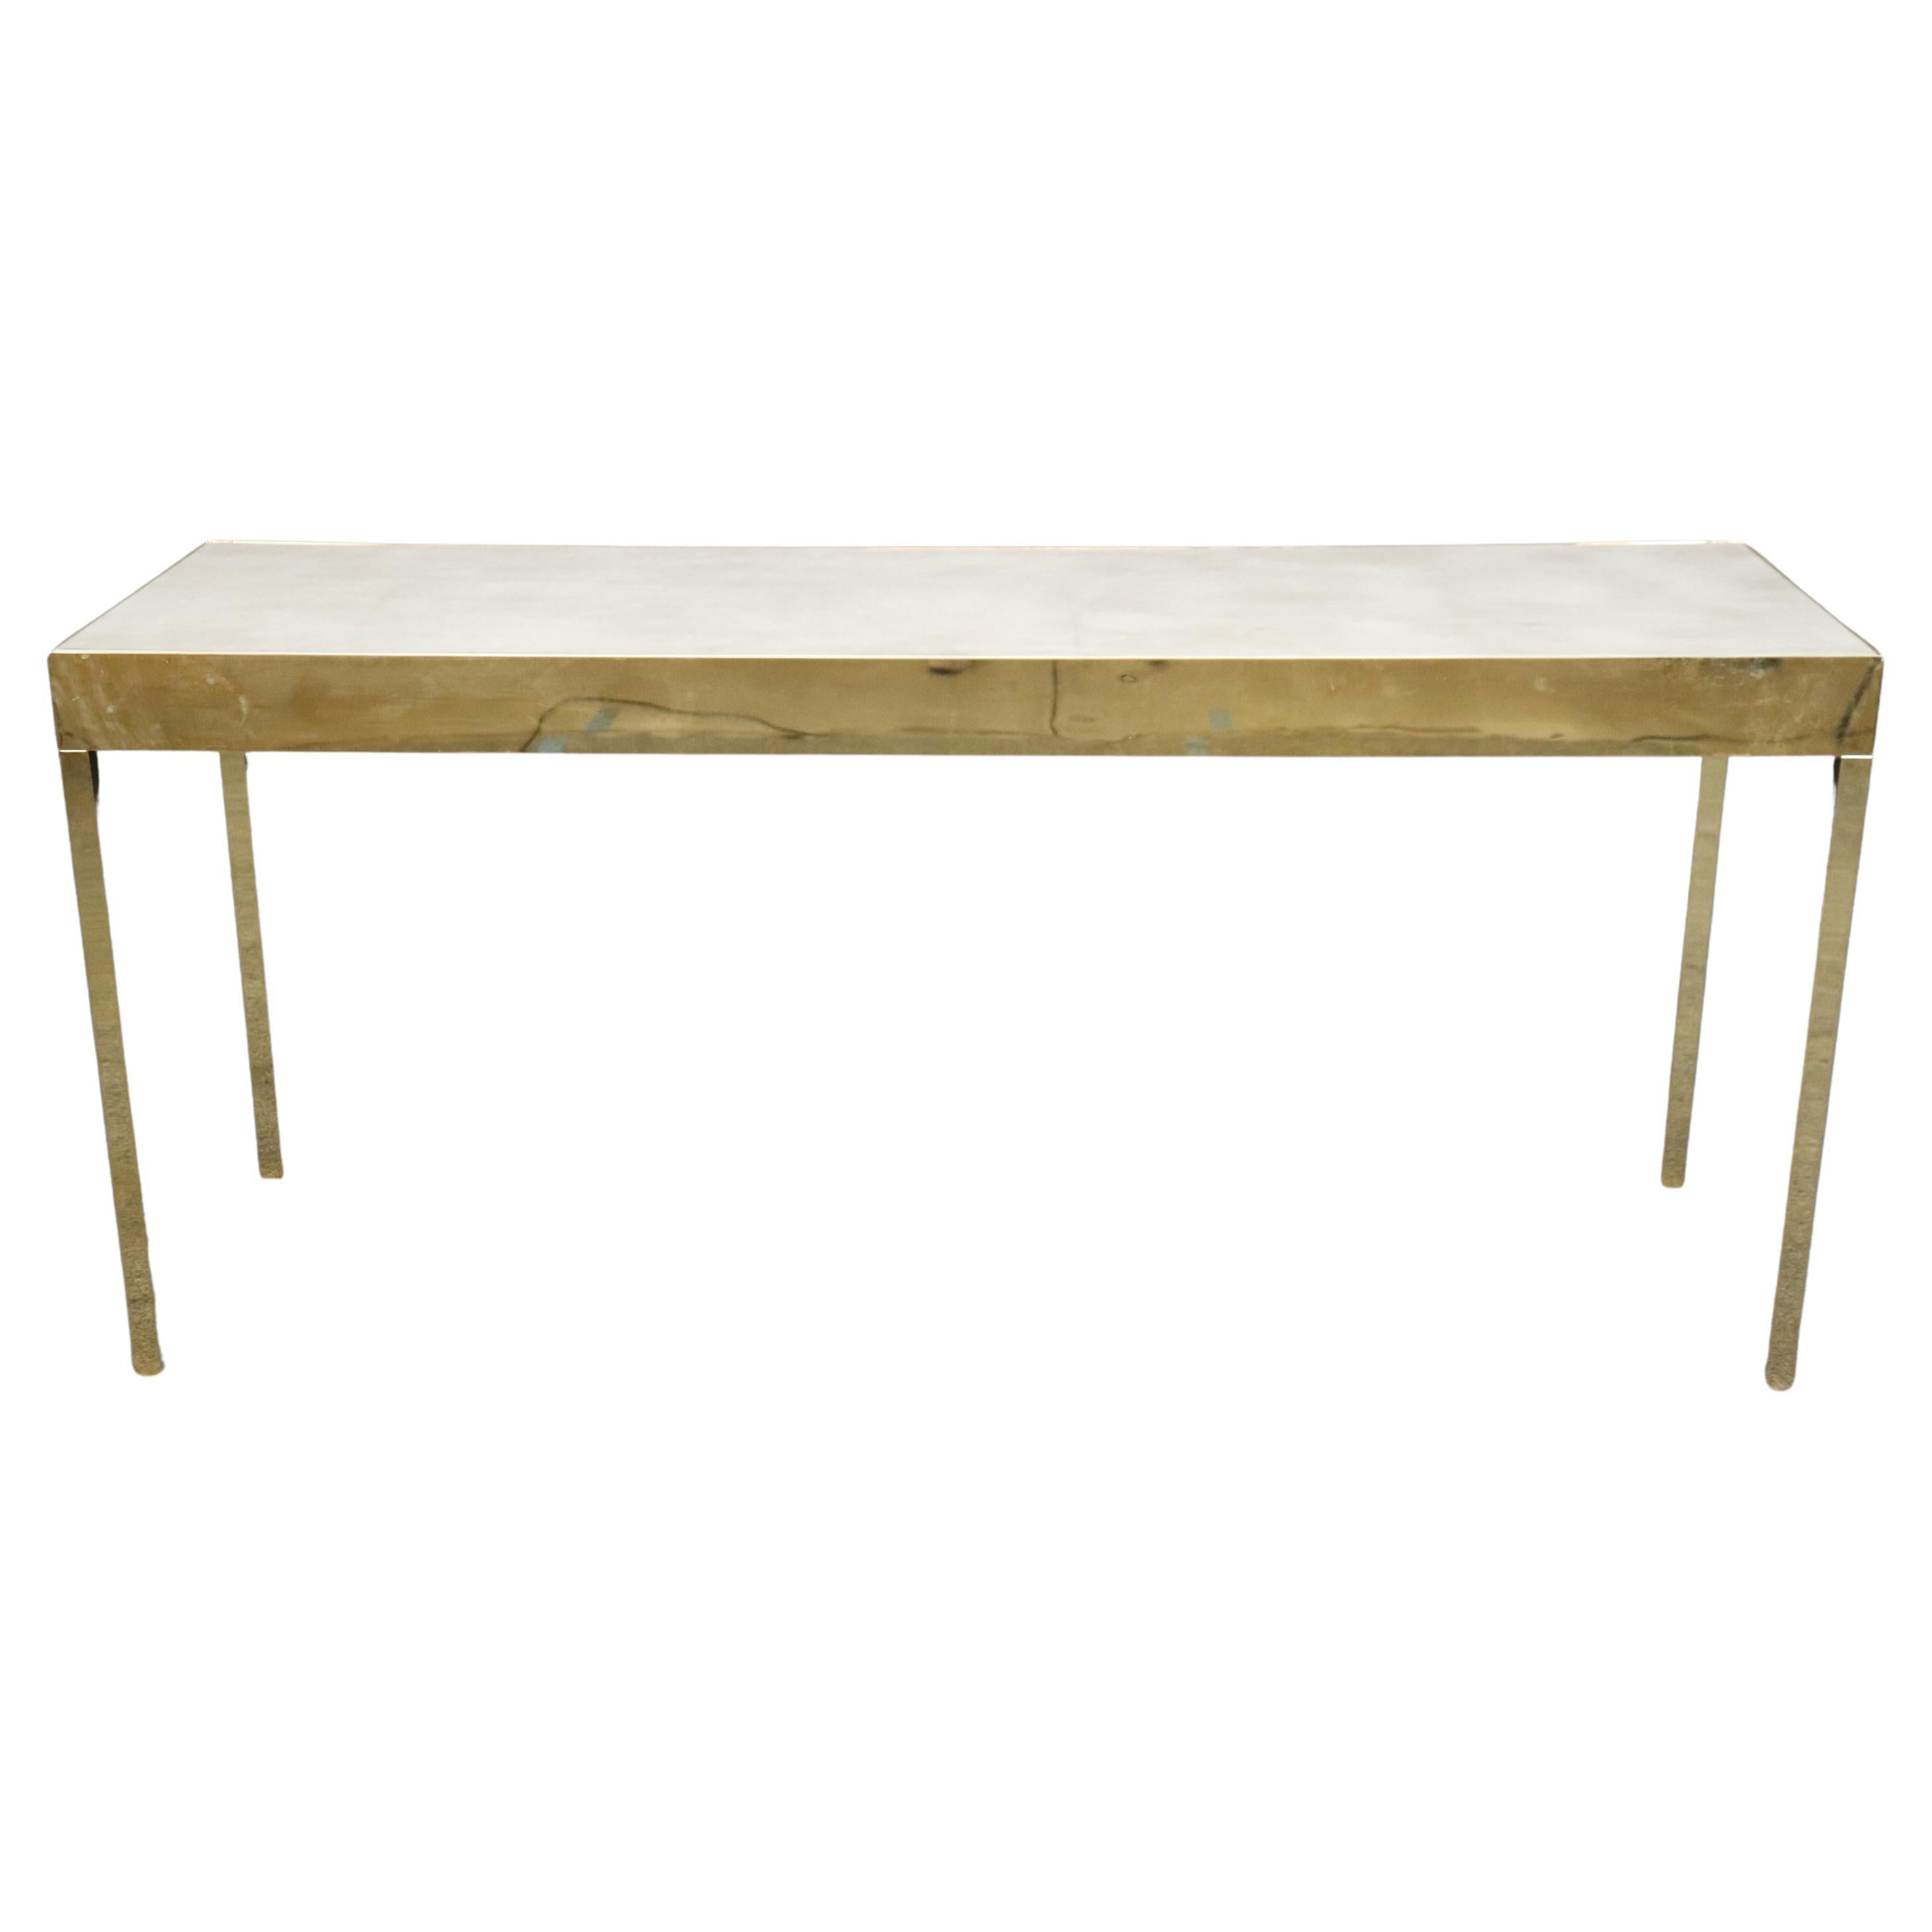 Milo Baughman Style Brass Flashed Faux Leather Console Table 2/2 For Sale